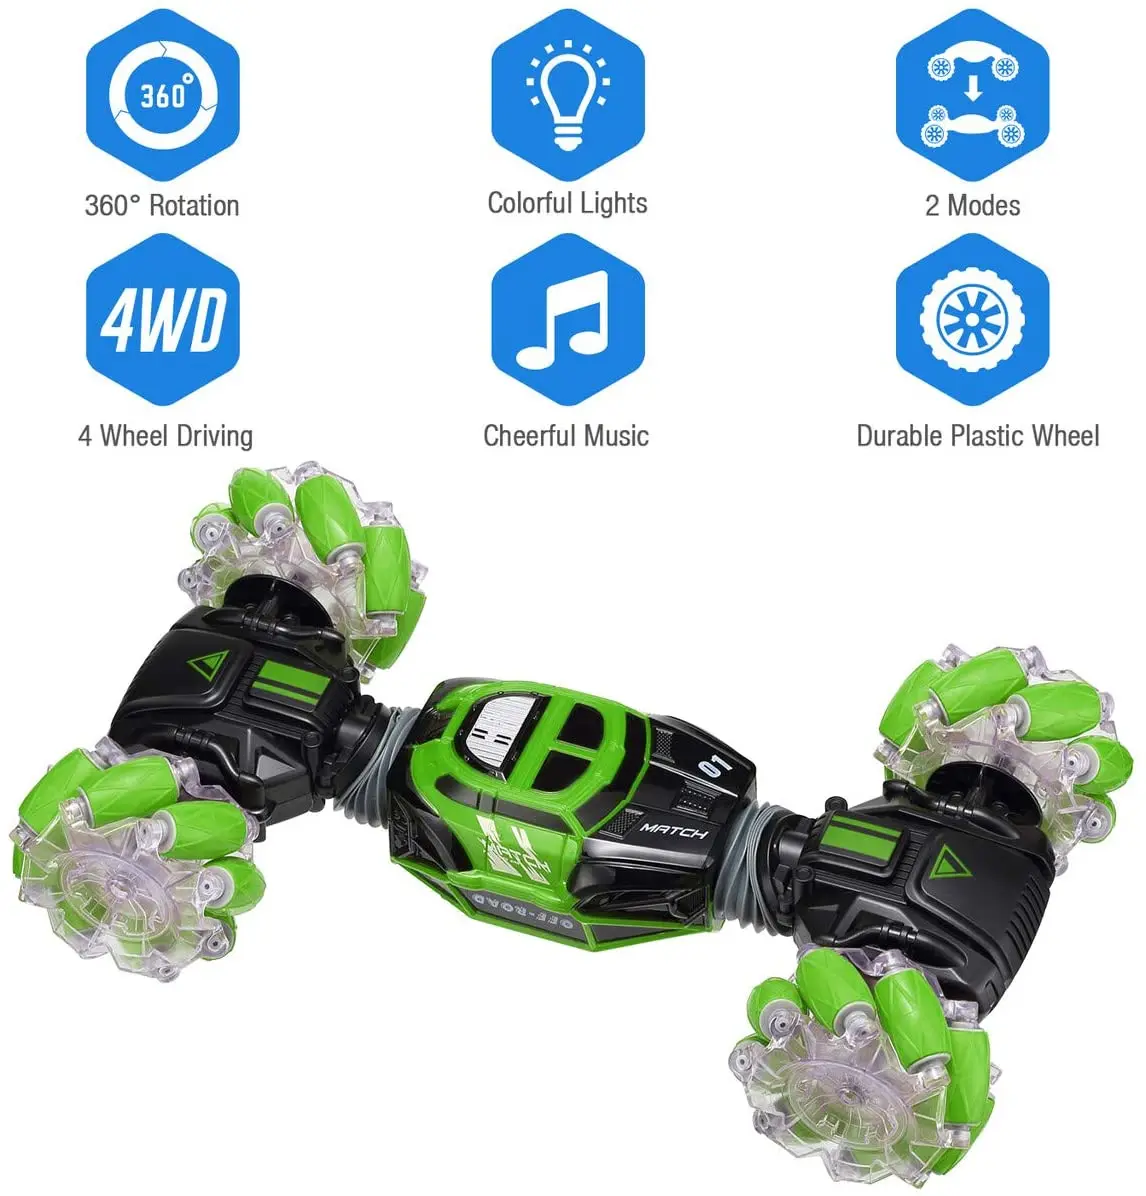 1:16 2.4Ghz RC Car 4wd Vehicle Toy Gesture induction remote control Deformable electric car toy High Speed Race Car RC Toy enlarge